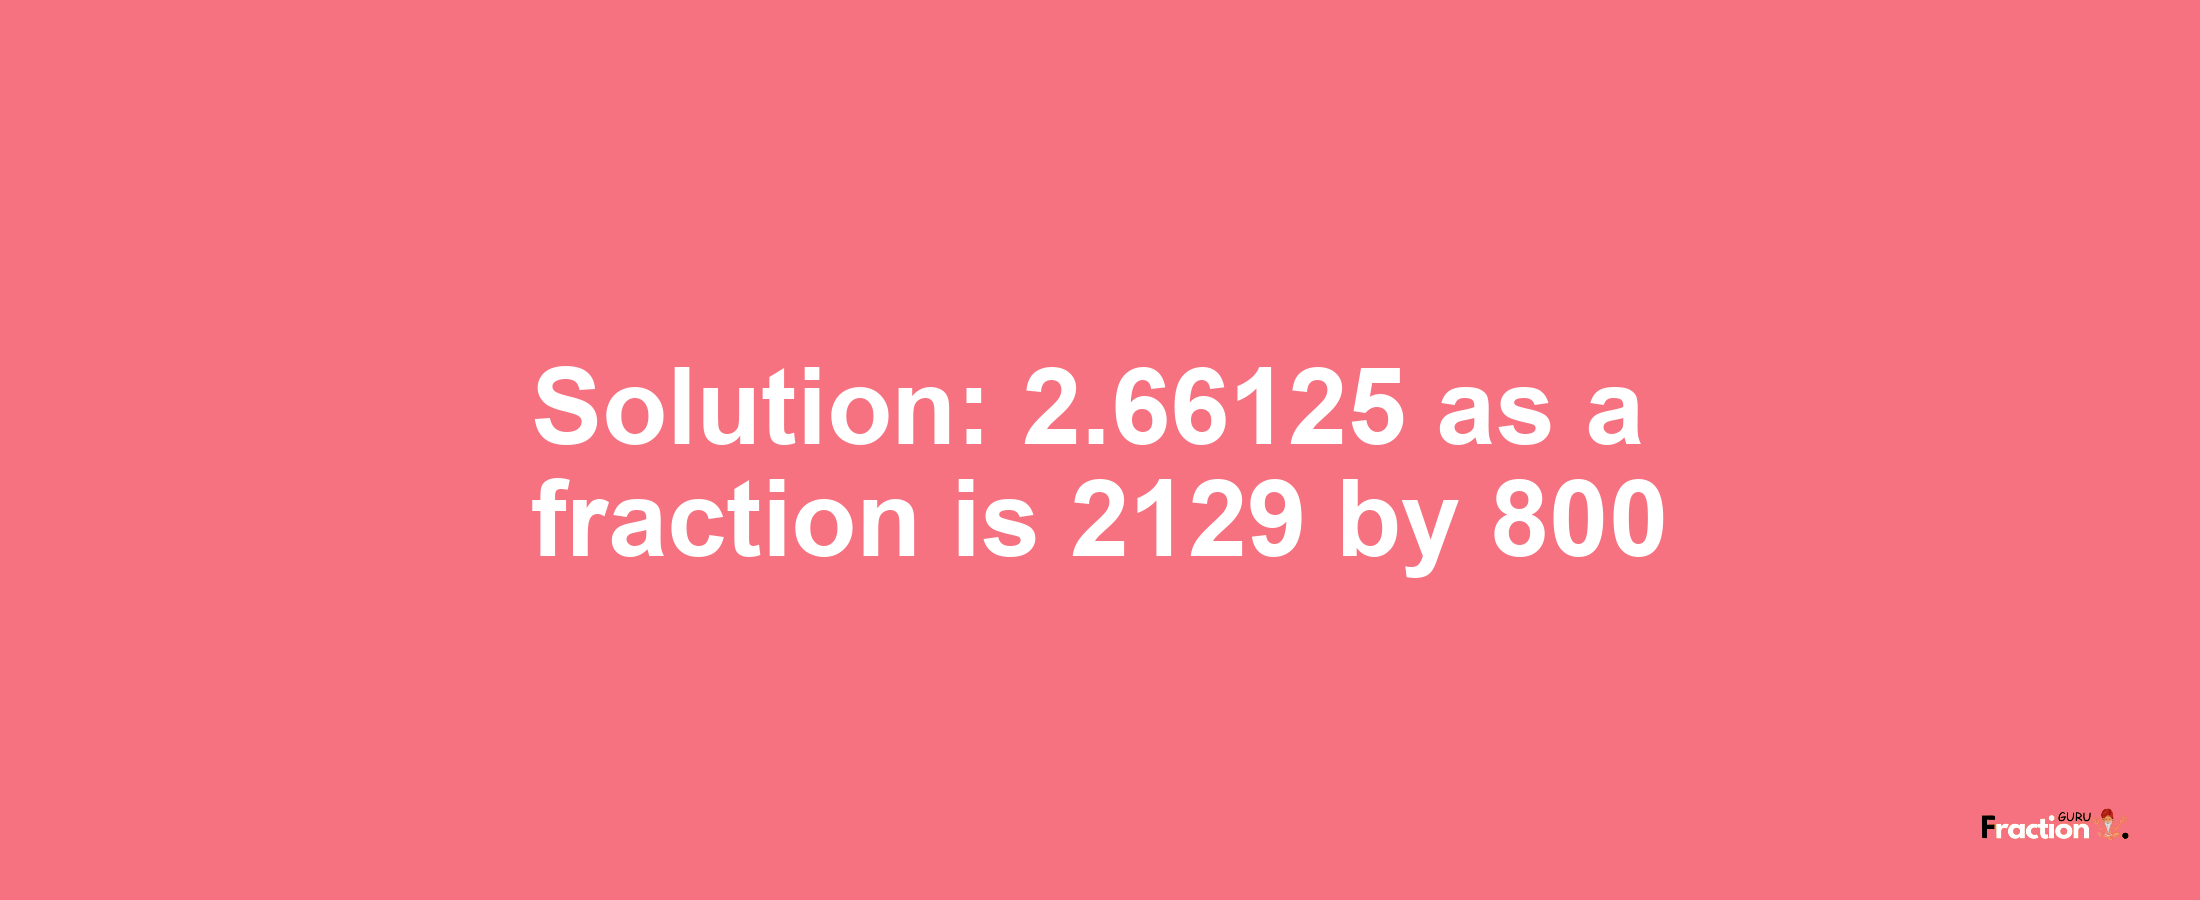 Solution:2.66125 as a fraction is 2129/800